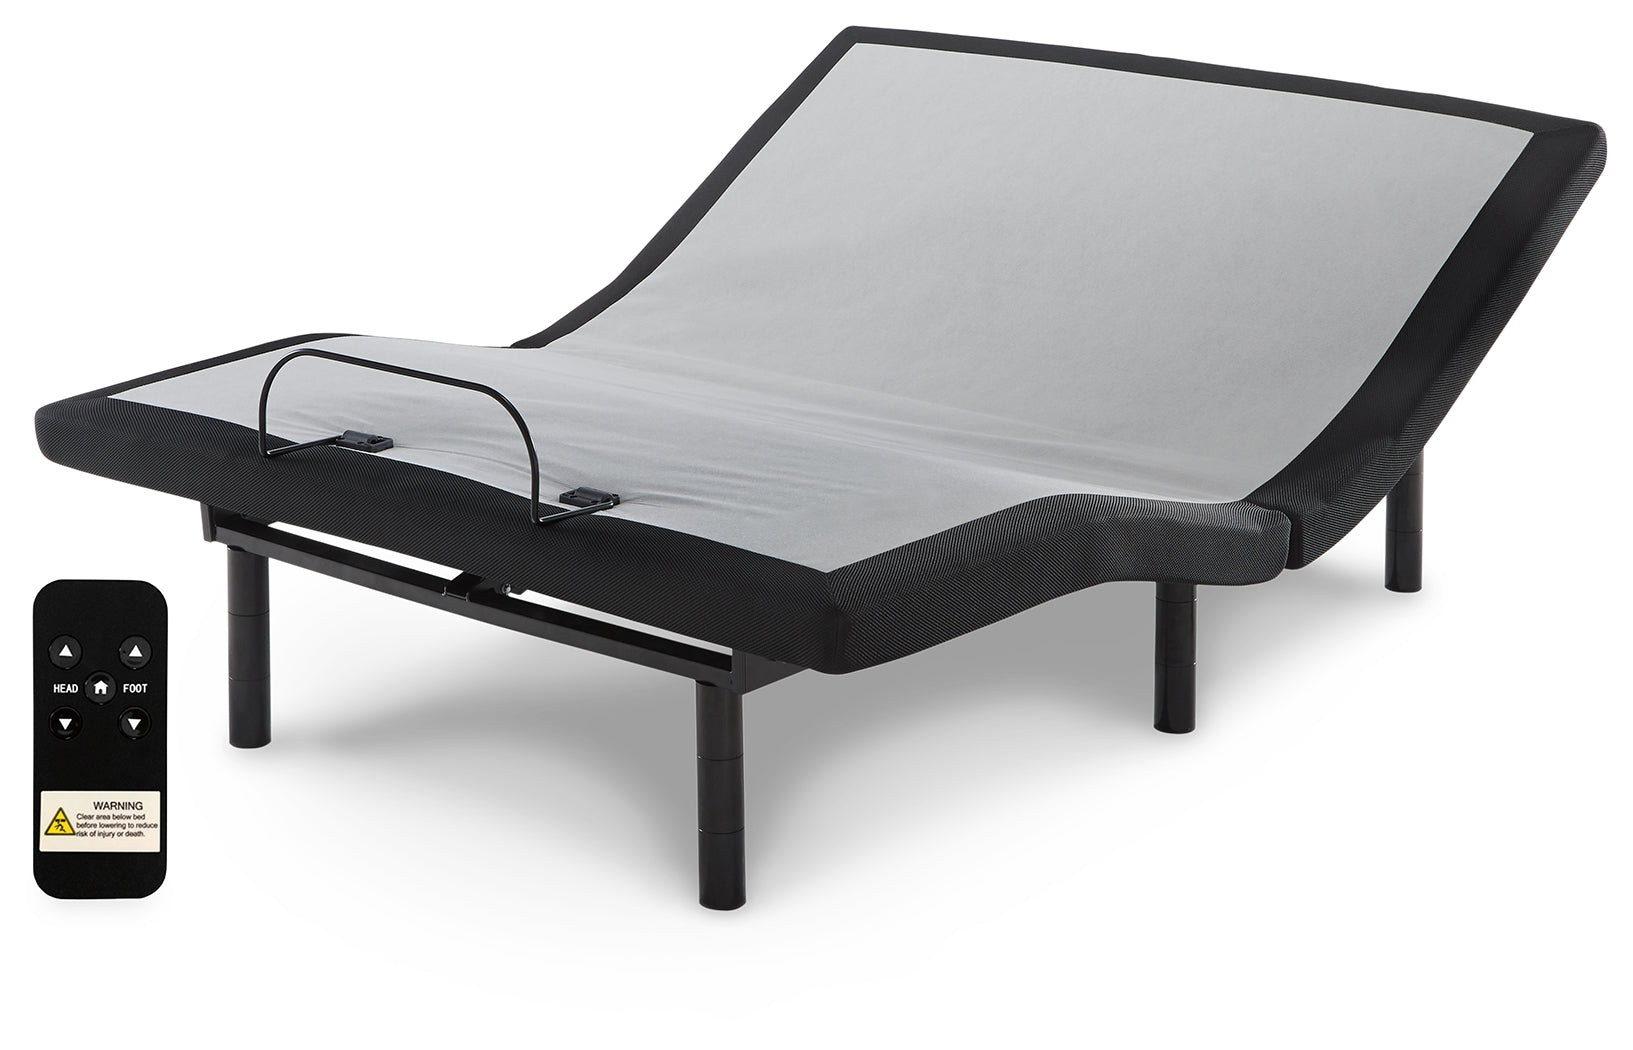 Limited Edition Firm King Mattress with Head-Foot Model-Good King Adjustable Base - furniture place usa